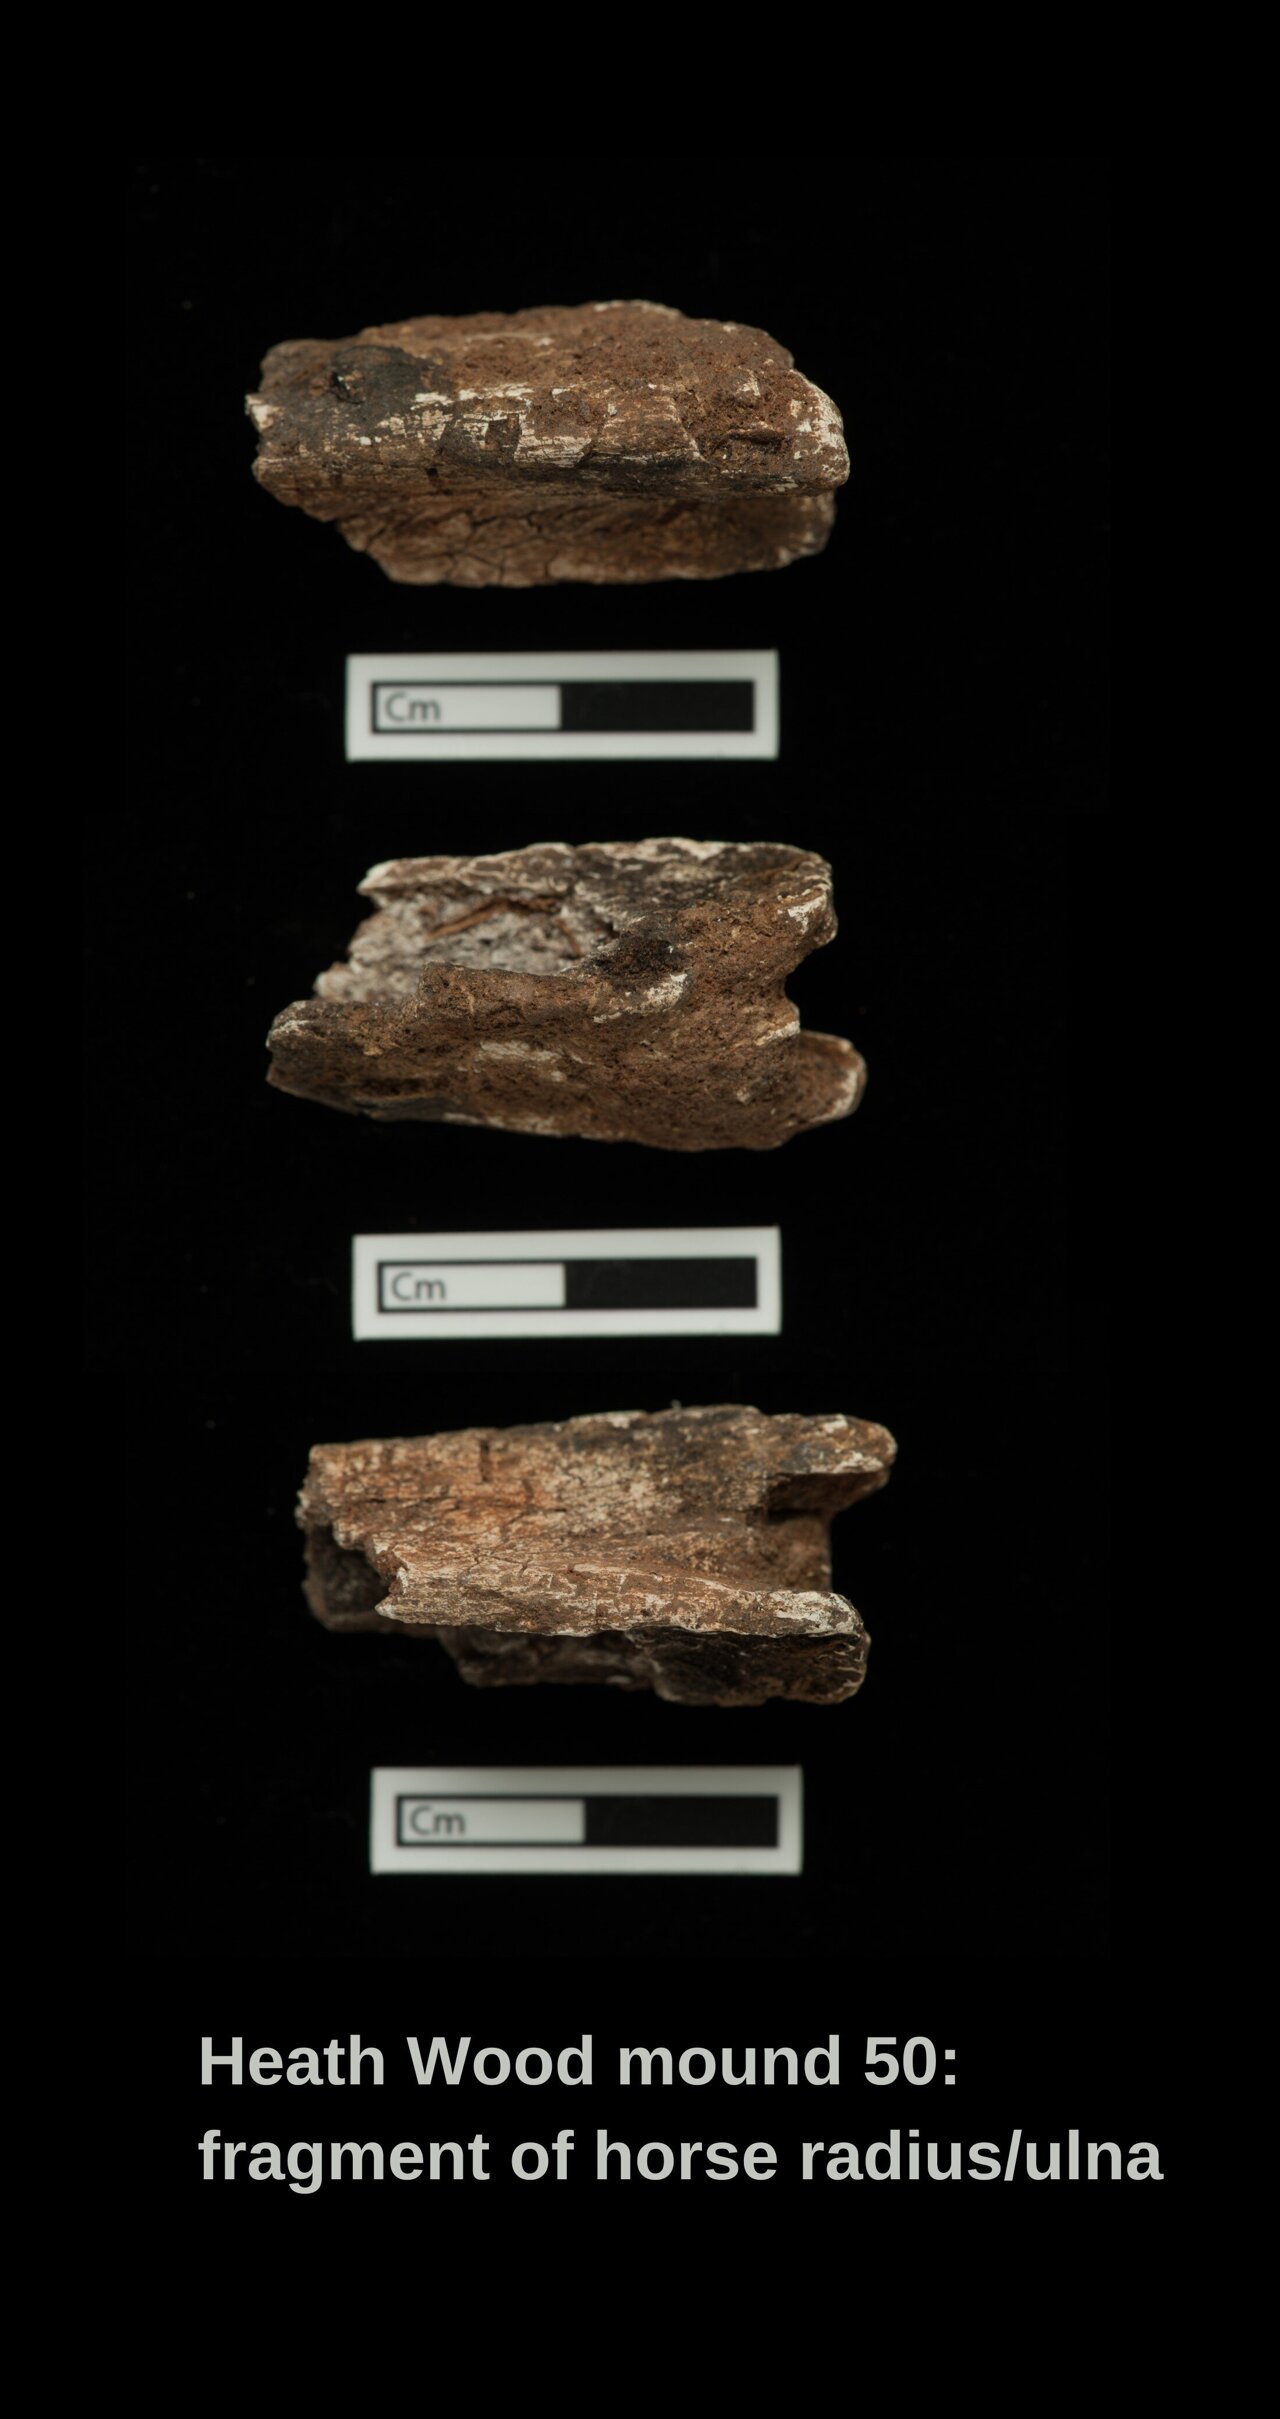 Fragment of a sampled cremated horse radius/ulna from burial mound 50 at Heath Wood.